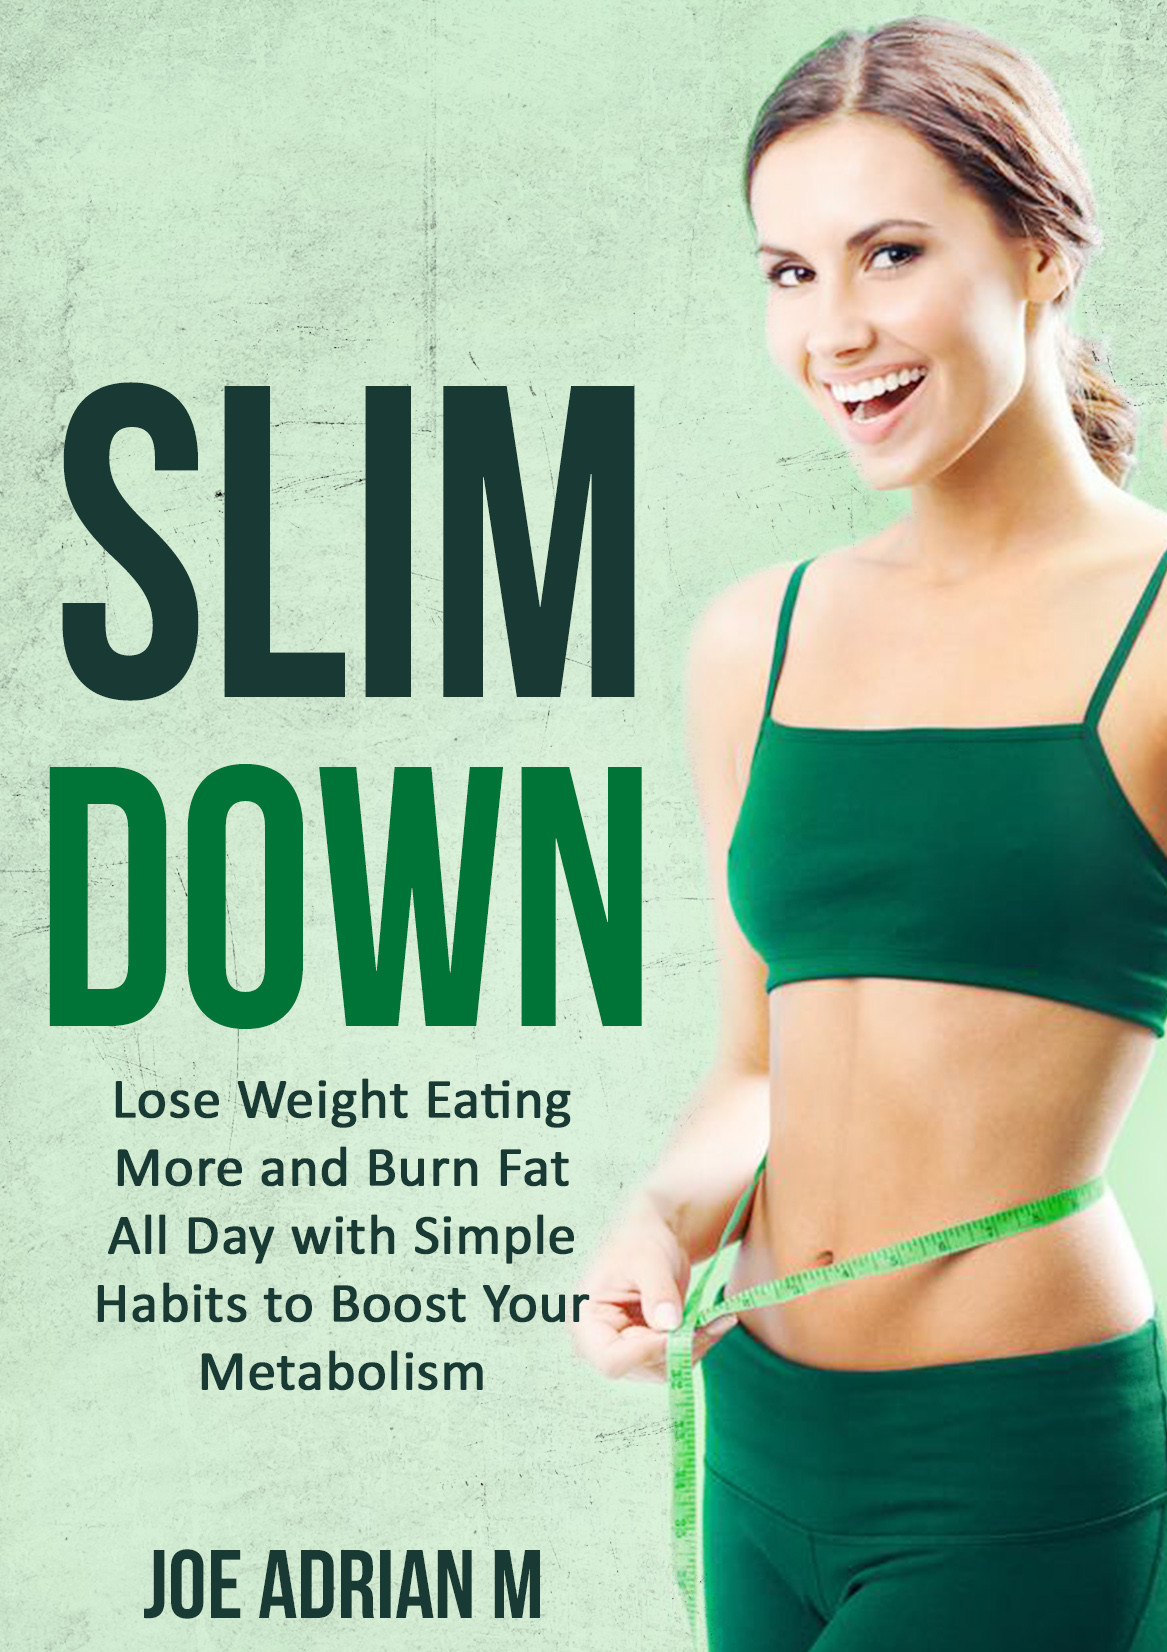 FREE: Slim Down: Lose Weight Eating More and Burn Fat All Day with Simple Habits to Boost Your Metabolism by Joe Adrian M